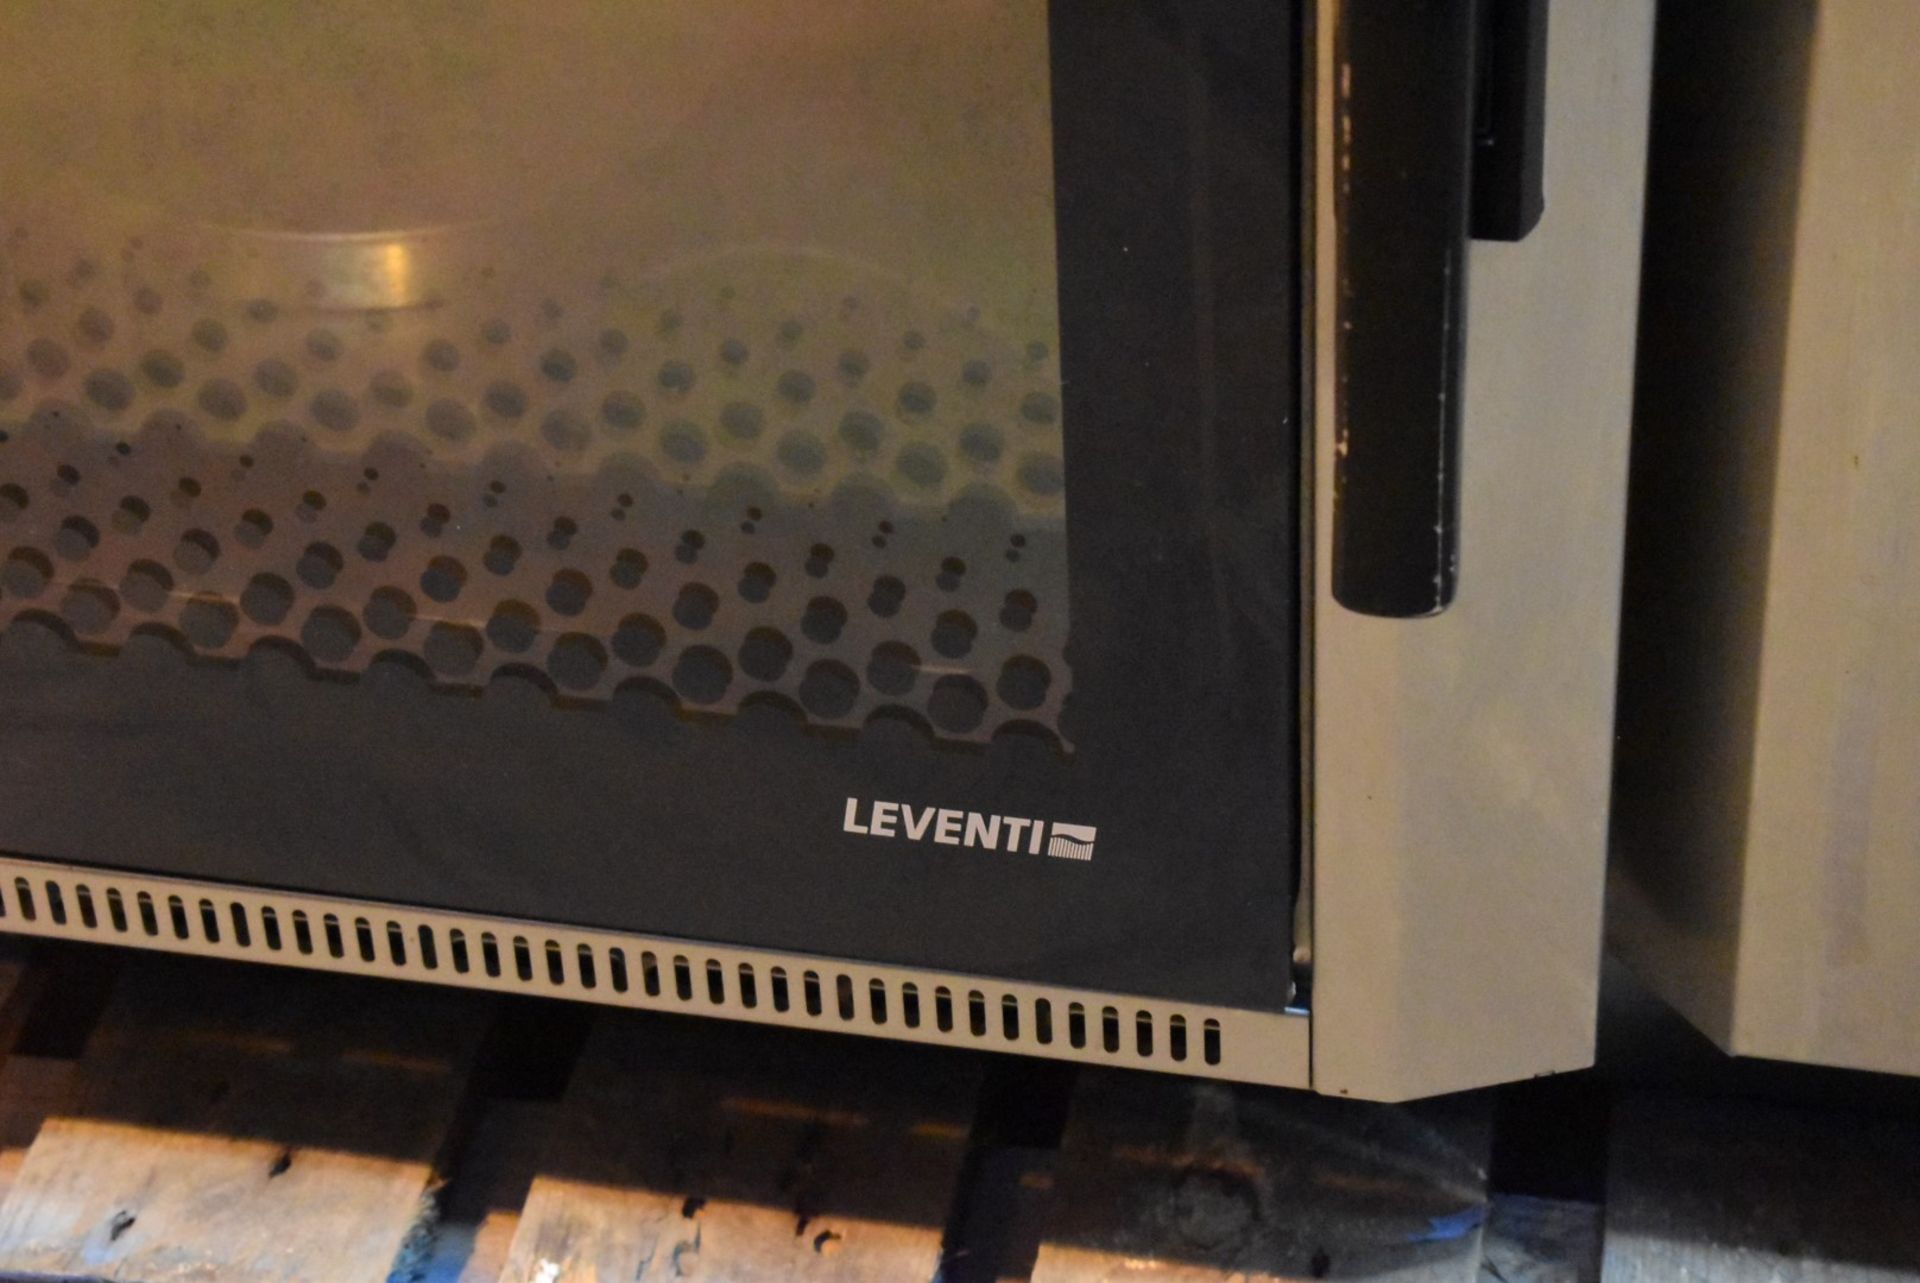 1 x Leventi Combimat mk3.1 Mastermind 6 Grid Combi Steam Oven - 3 Phase - Recently Removed From a - Image 10 of 11